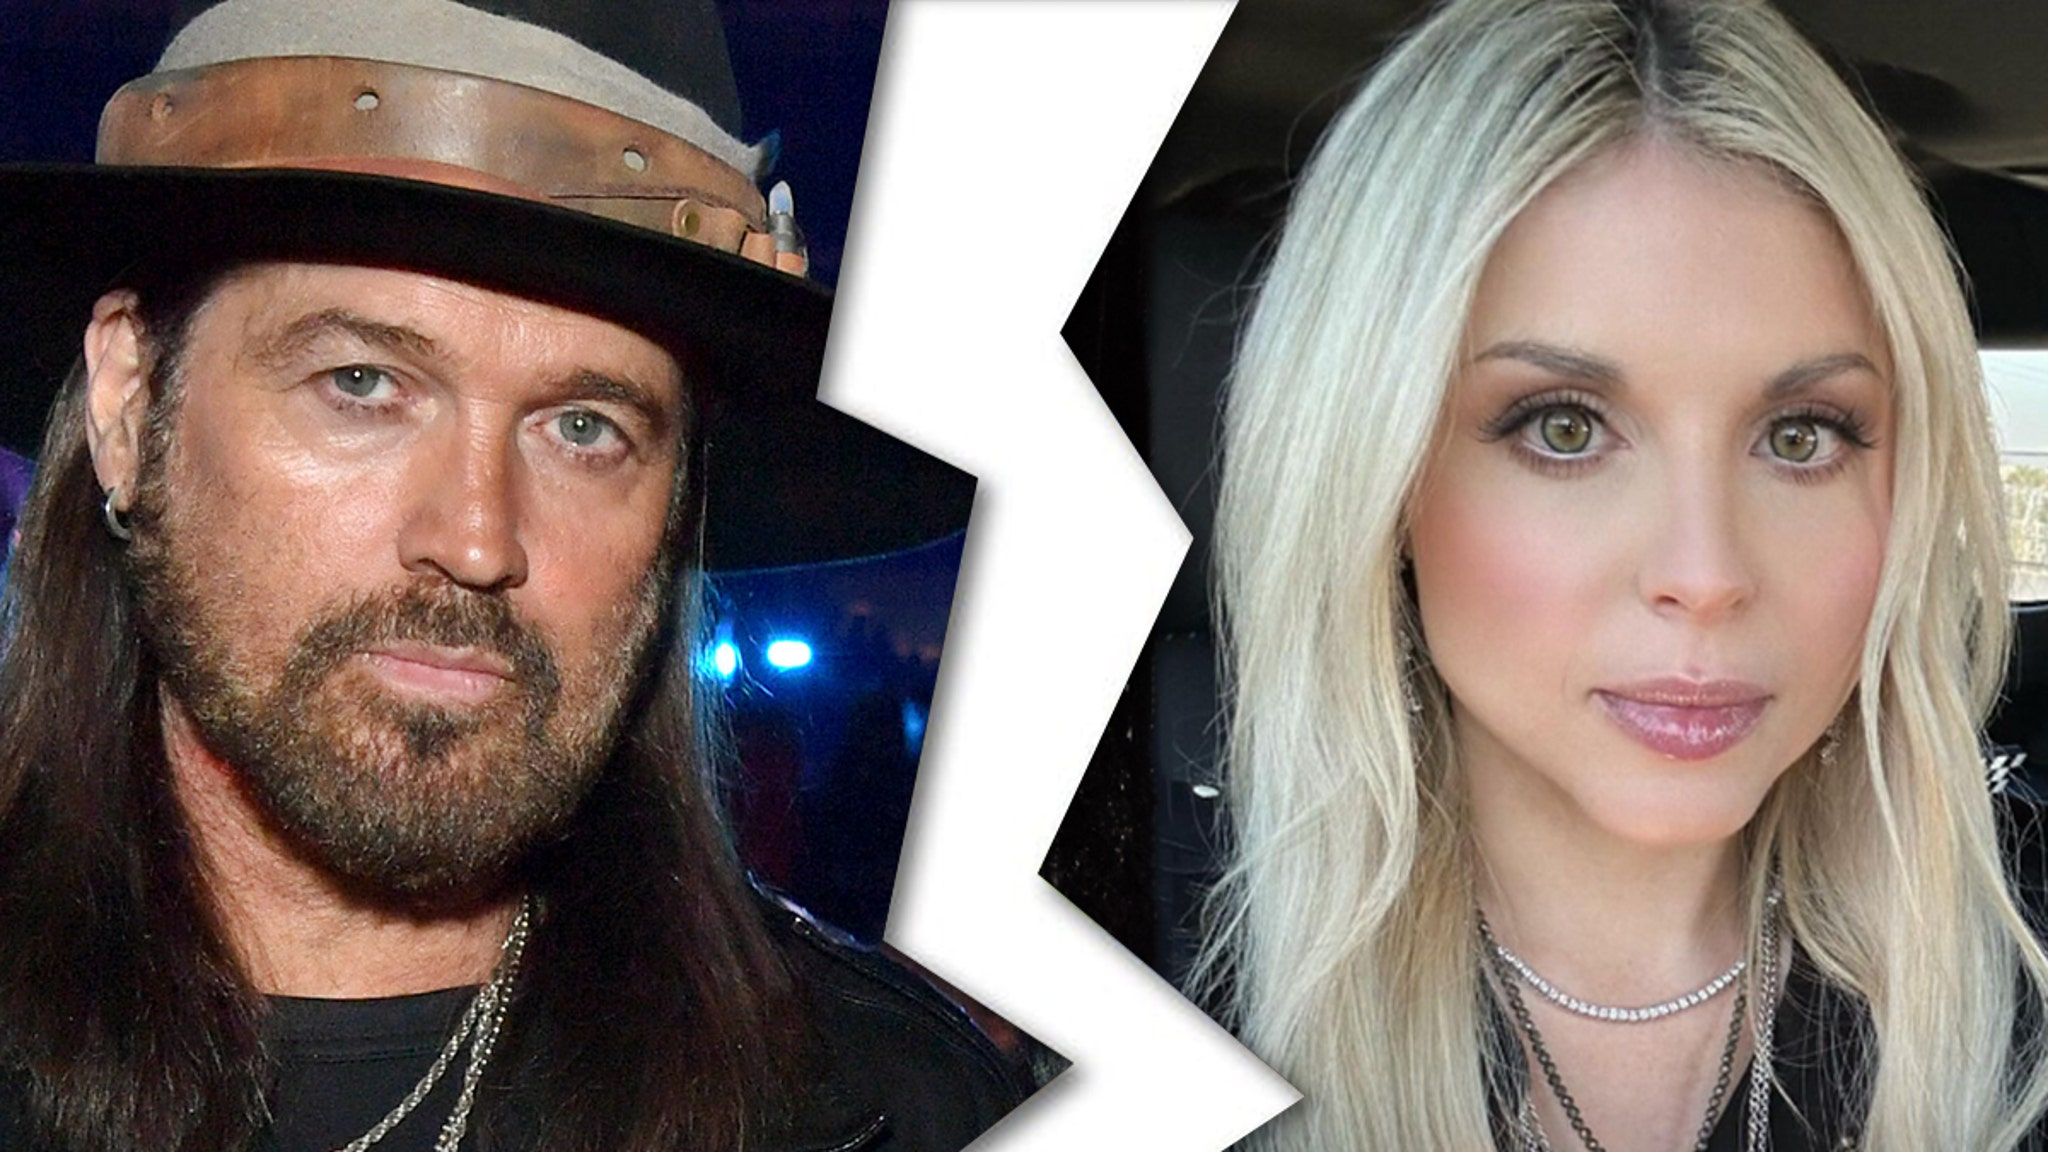 Billy Ray Cyrus Files to Divorce Wife Firerose 7 Months After Getting Married